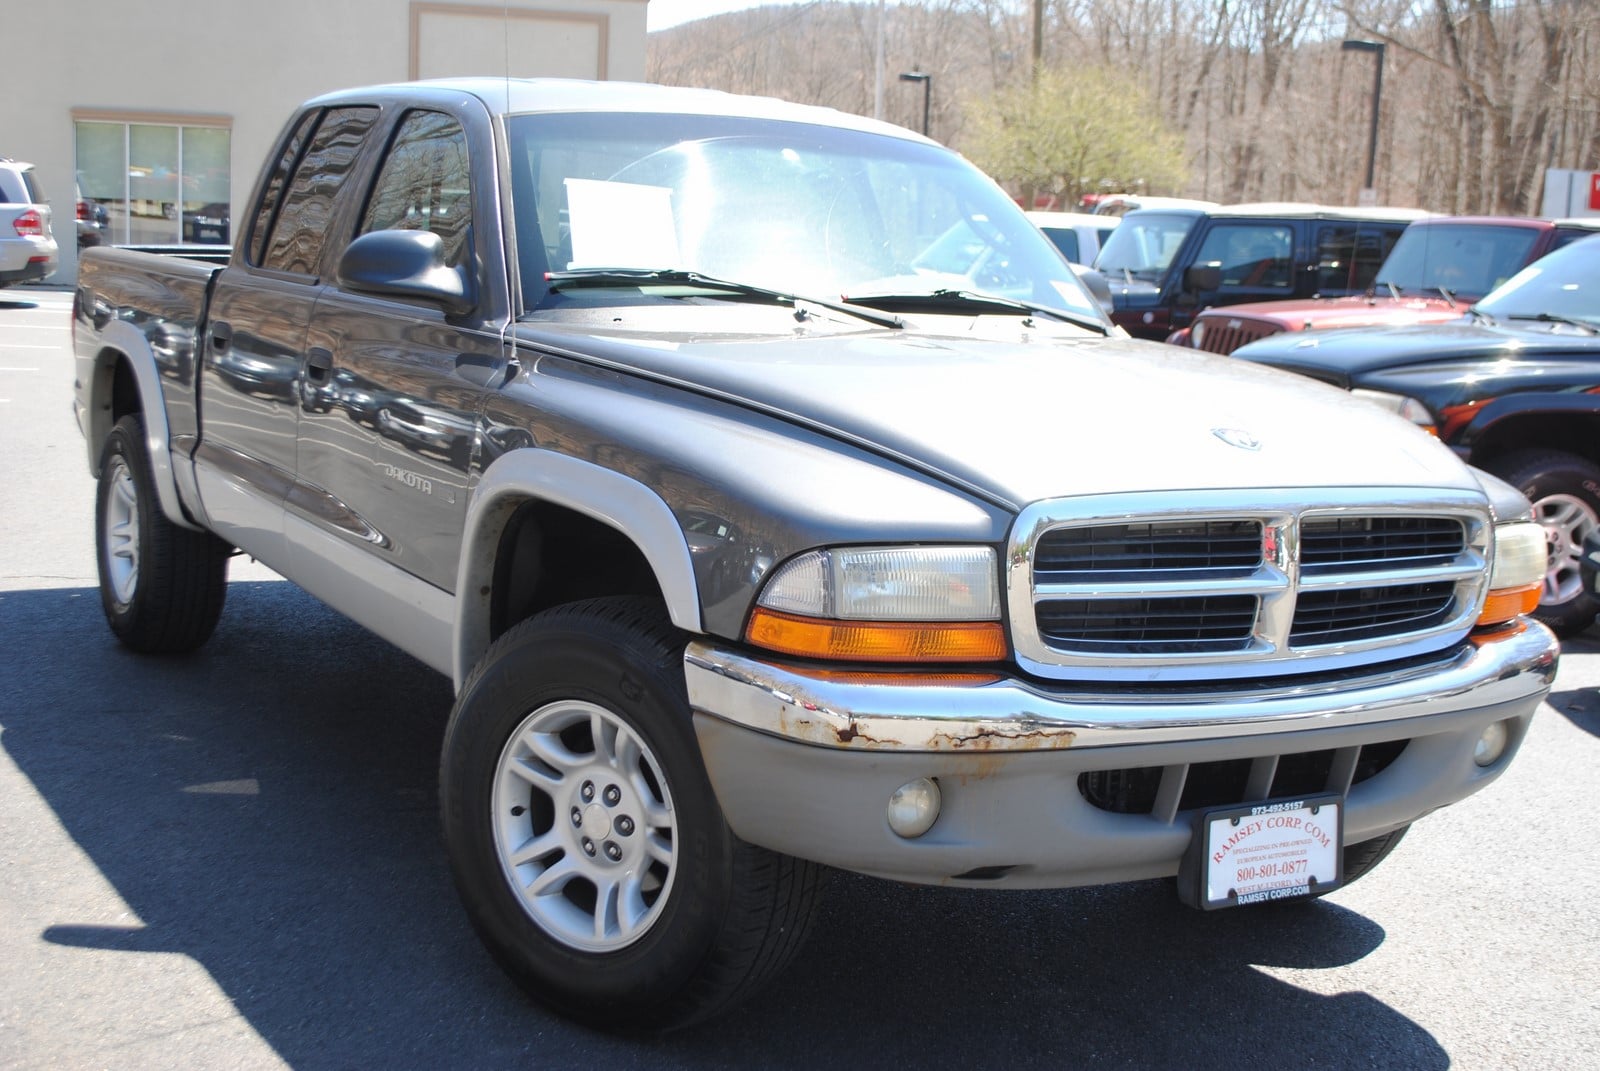 Used 2001 Dodge Dakota For Sale at Ramsey Corp. | VIN: 1B7HG2AN41S340181